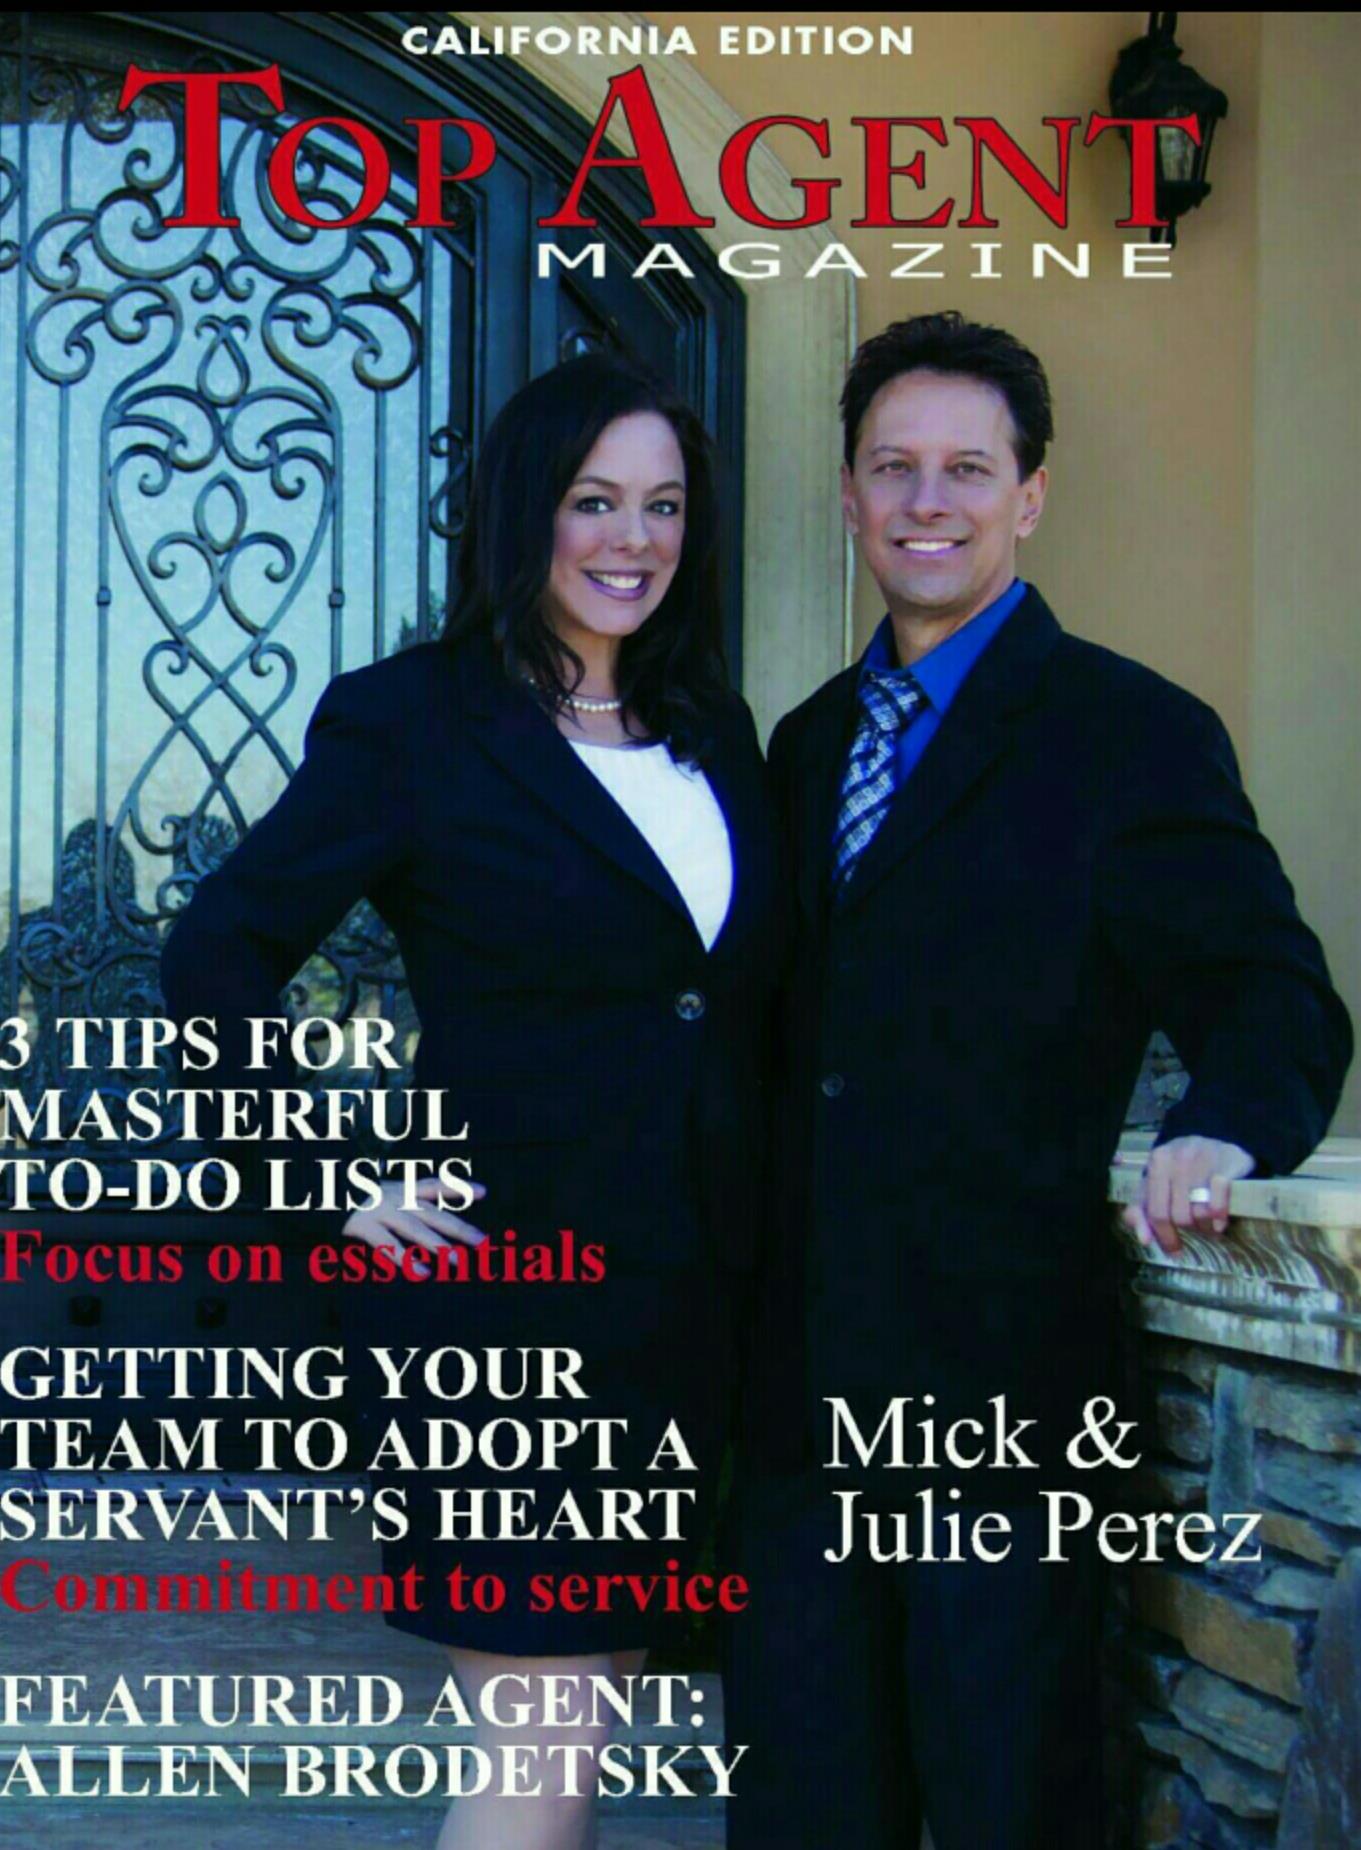 Mick and Julie Perez - Cover of Top Agent Magazine April 2015